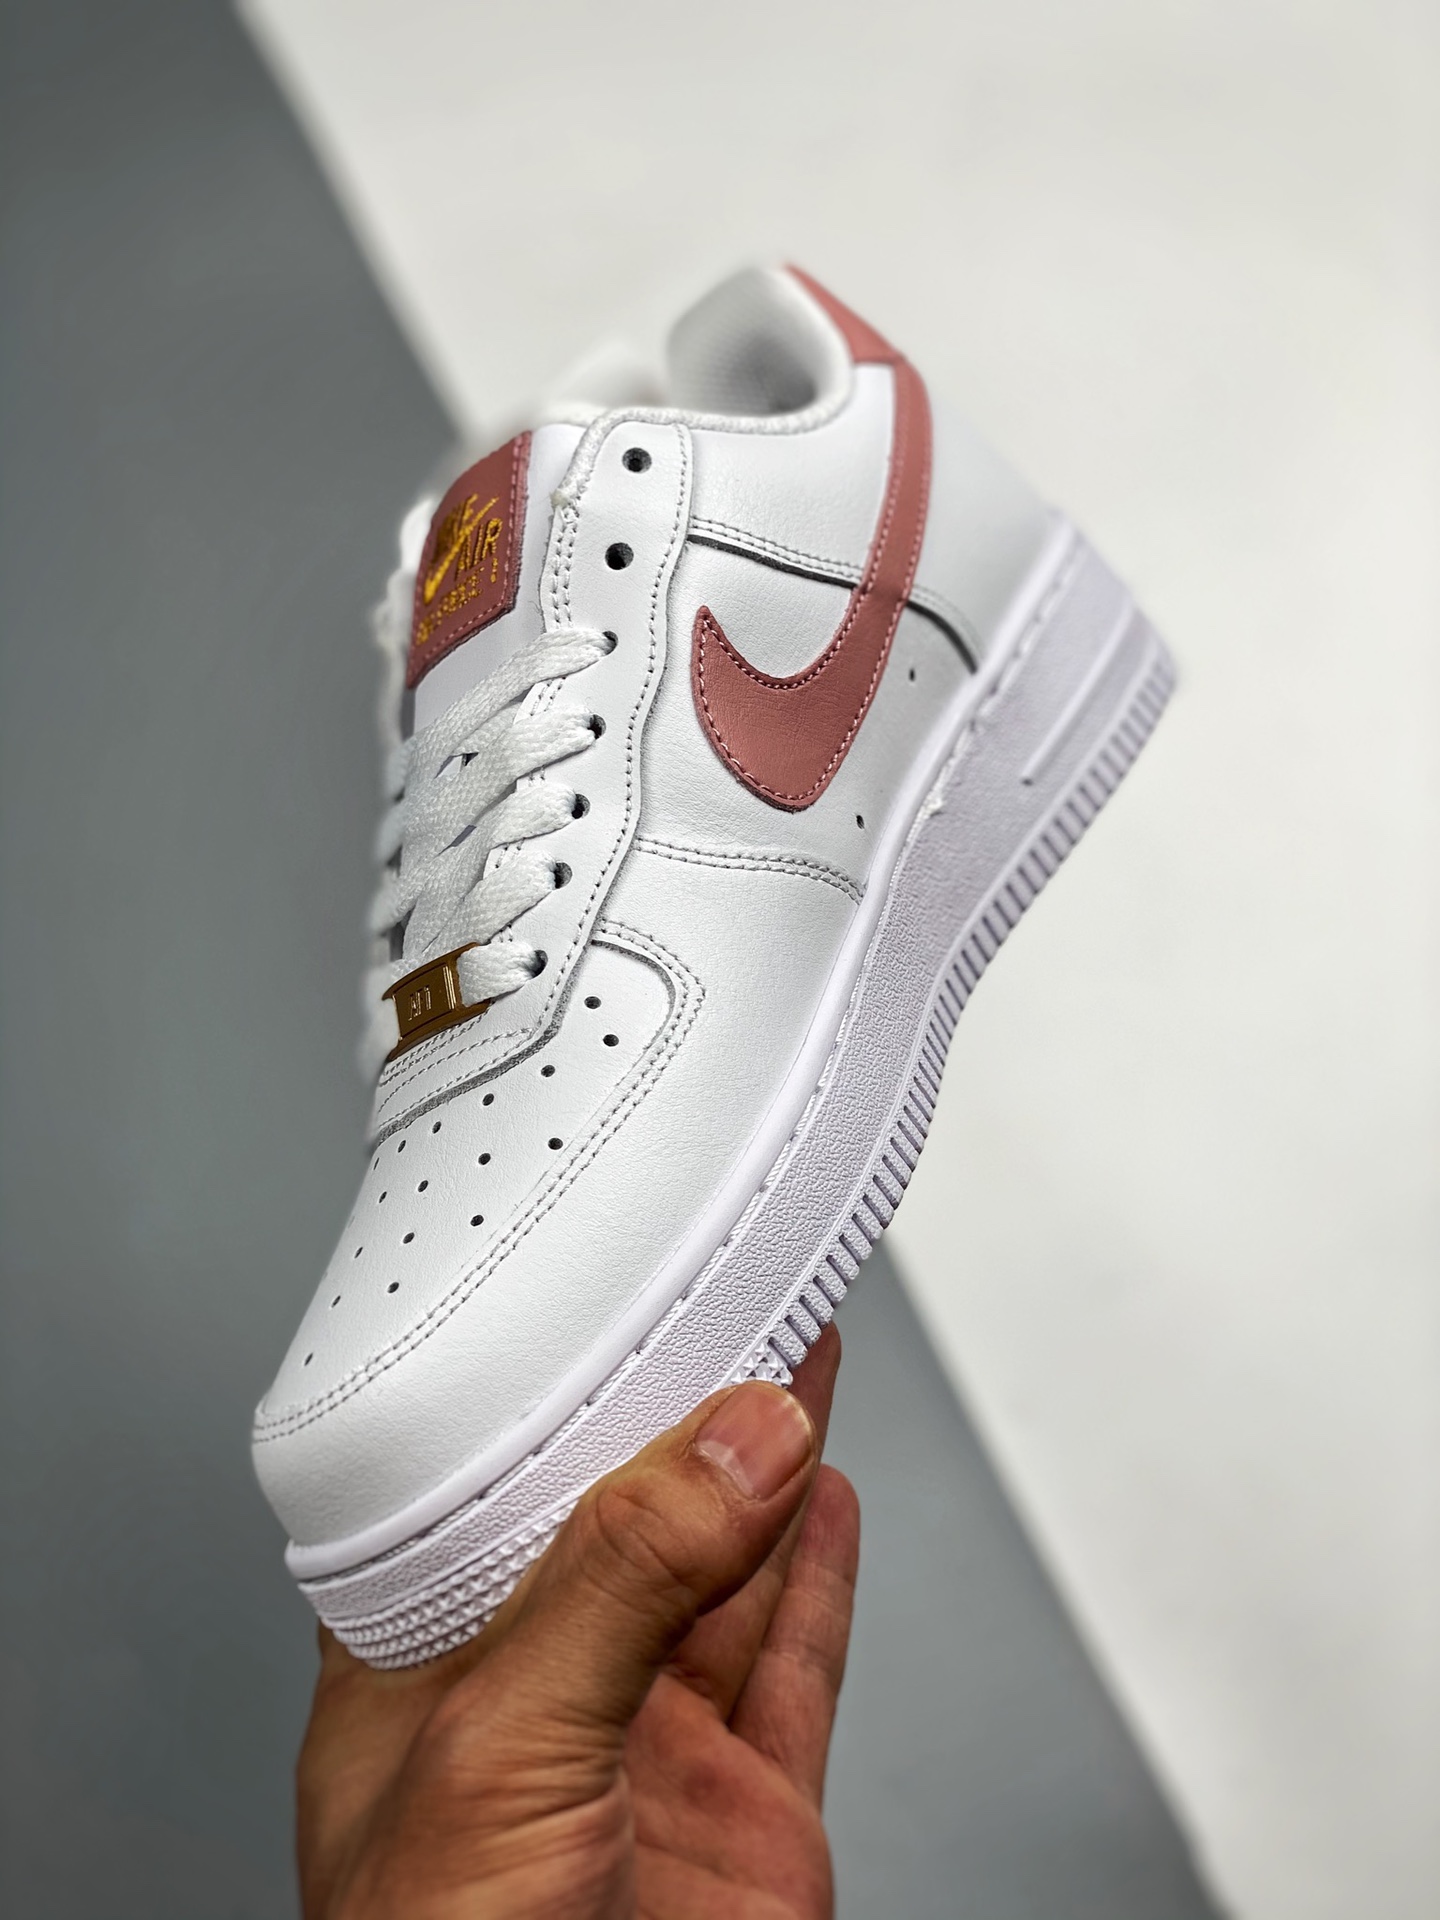 Commerce Dignified Conditional air force 1 white rust pink Abandoned ...